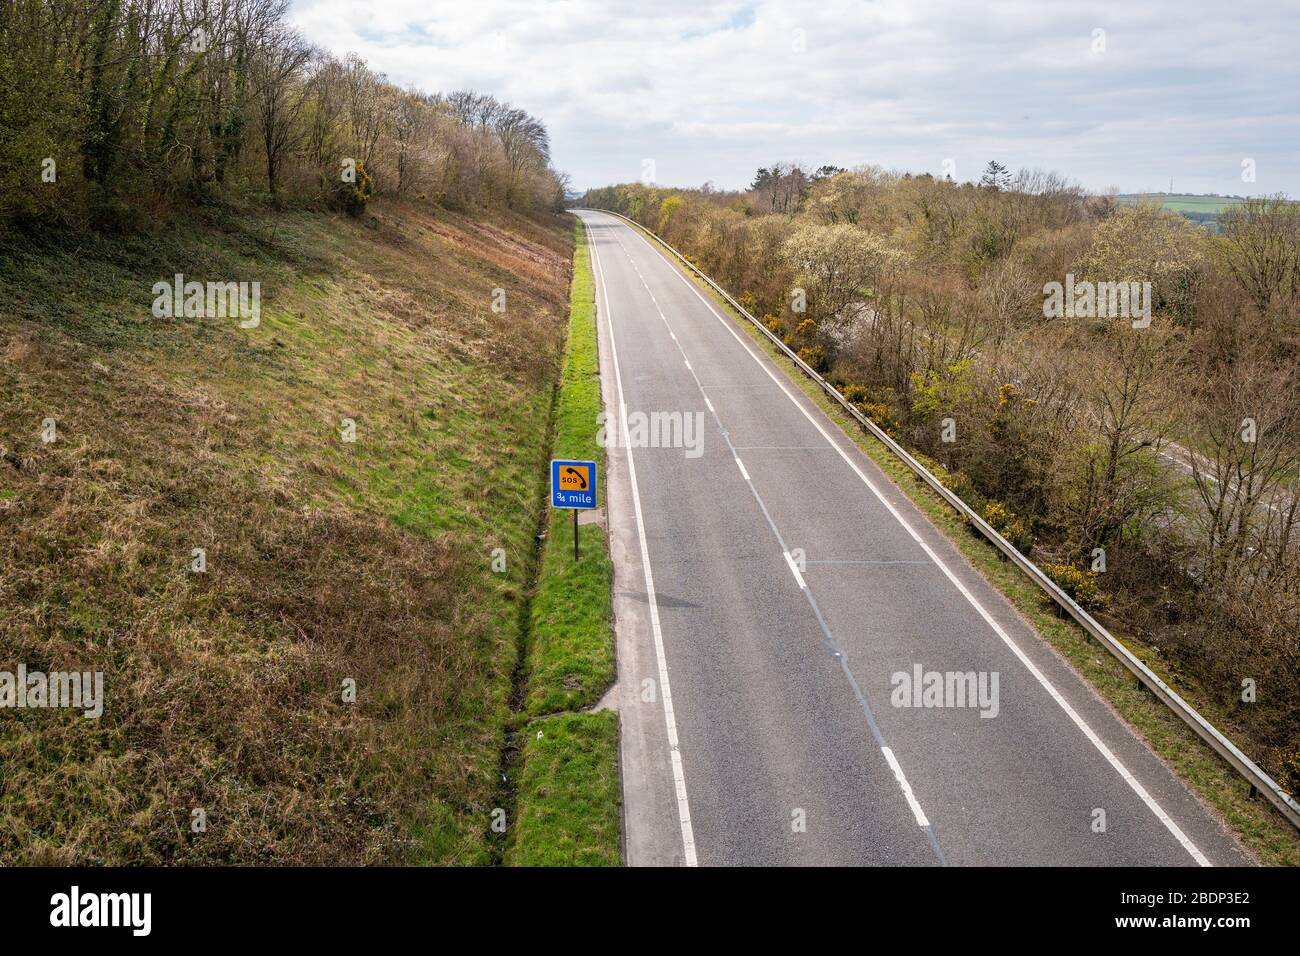 Empty A30 trunk road shows no spring holiday traffic bound for Cornwall in England's south west during the COVID-19 travel restrictions, April 2020. Stock Photo